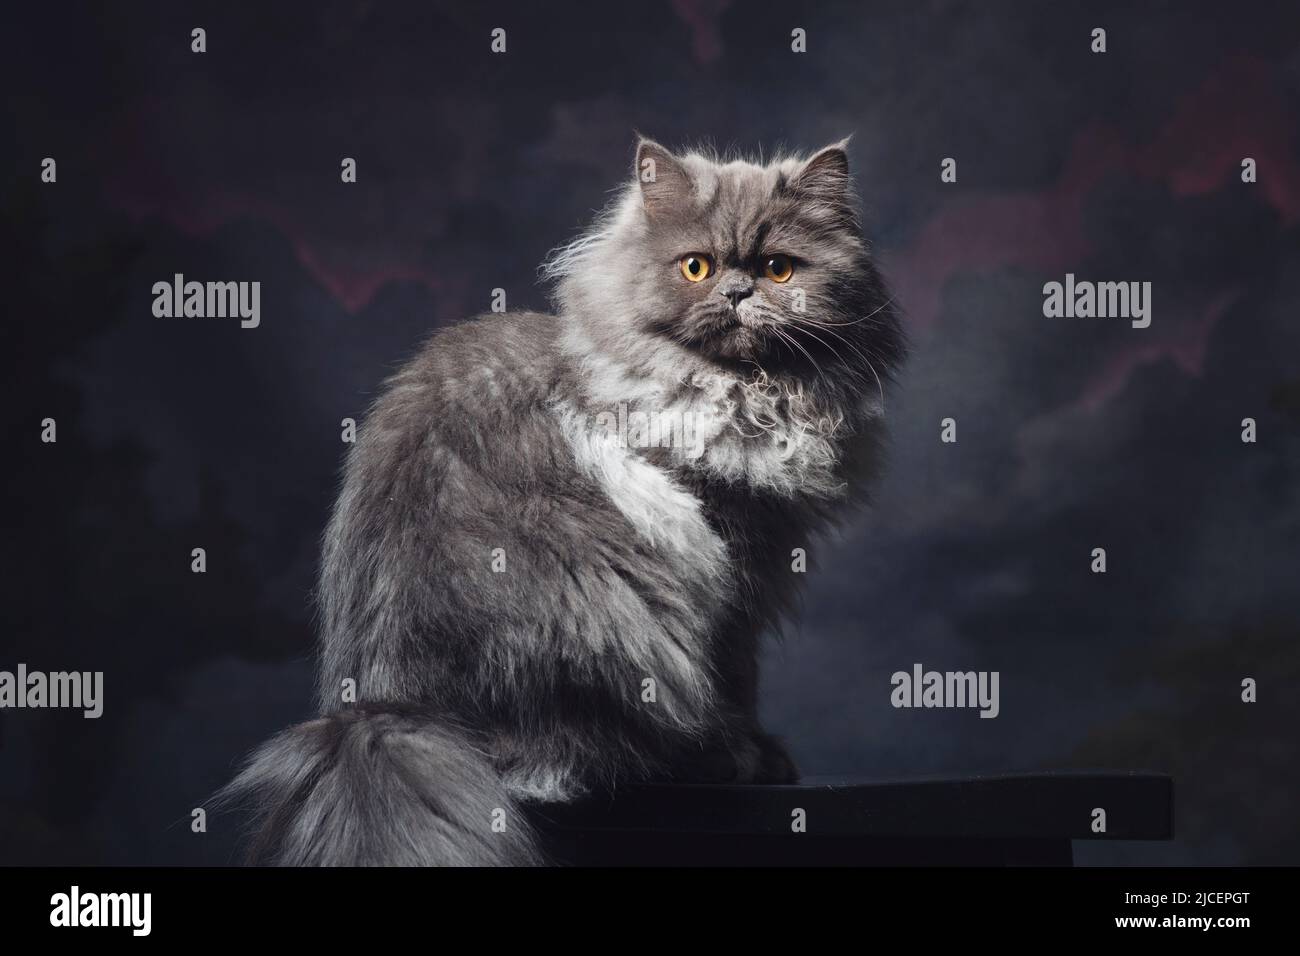 Portrait of a beautifuly fluffy grey and silver cat against a painted backdrop. Stock Photo